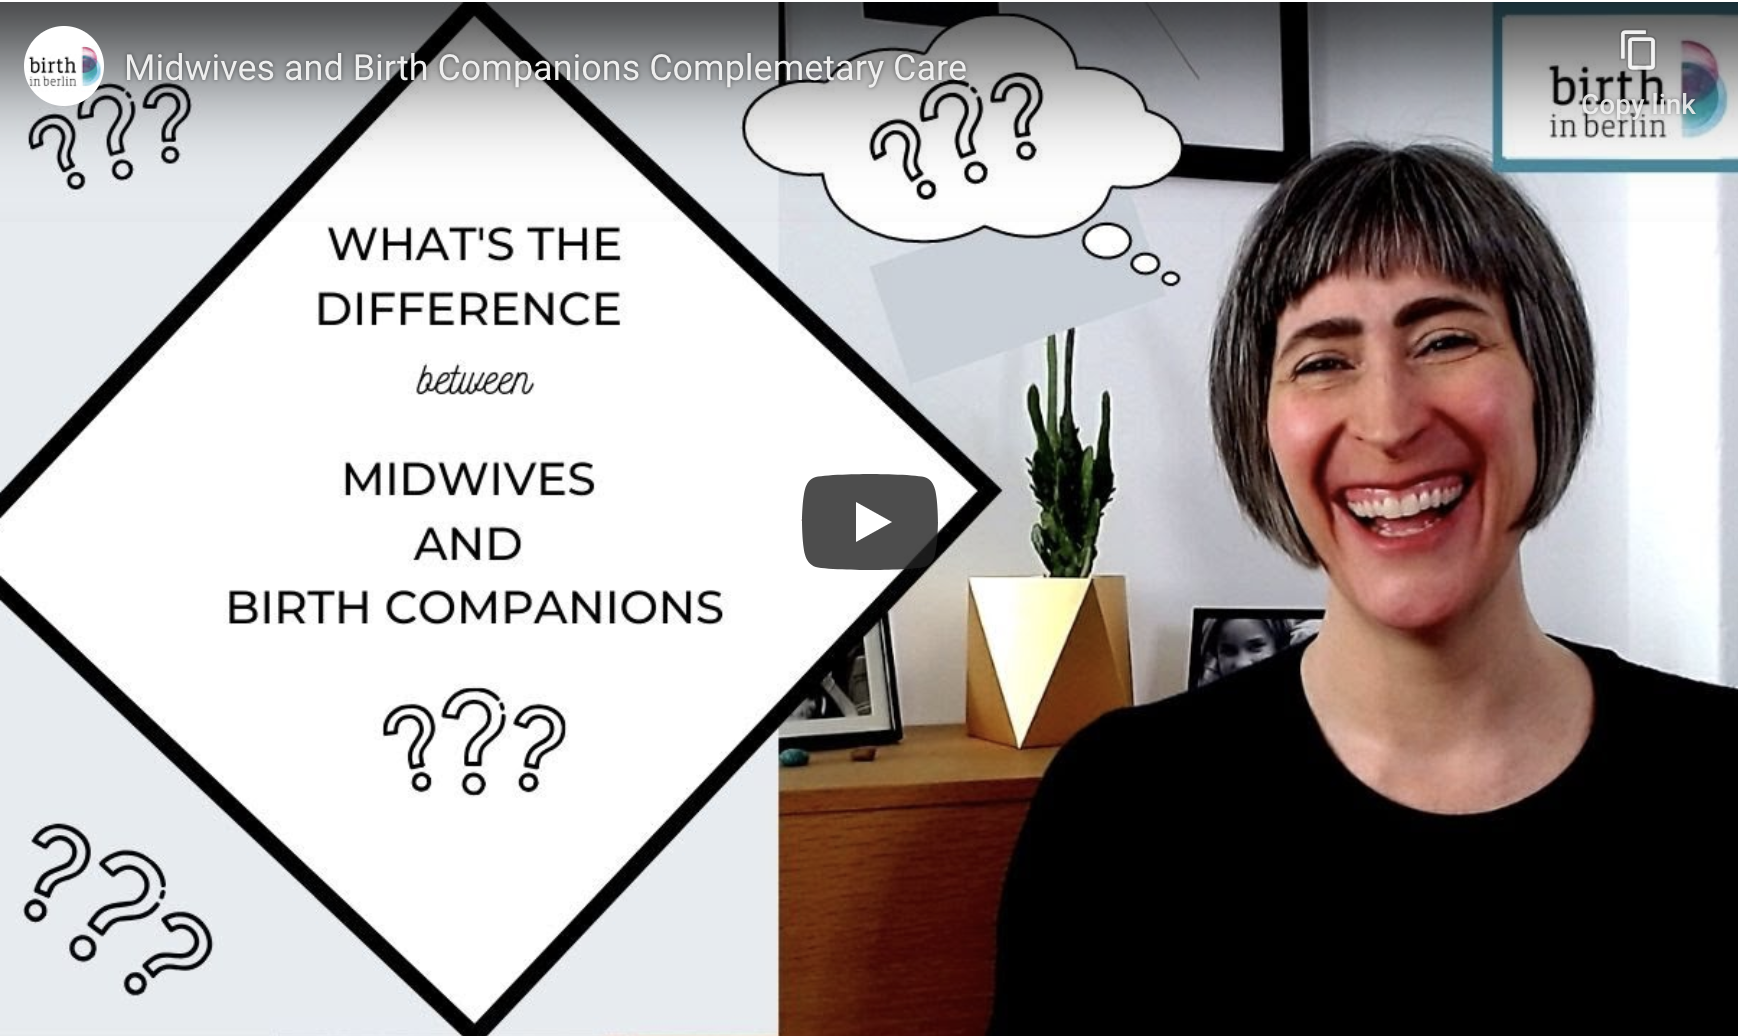 Midwives and Birth Companions, Complementary Care